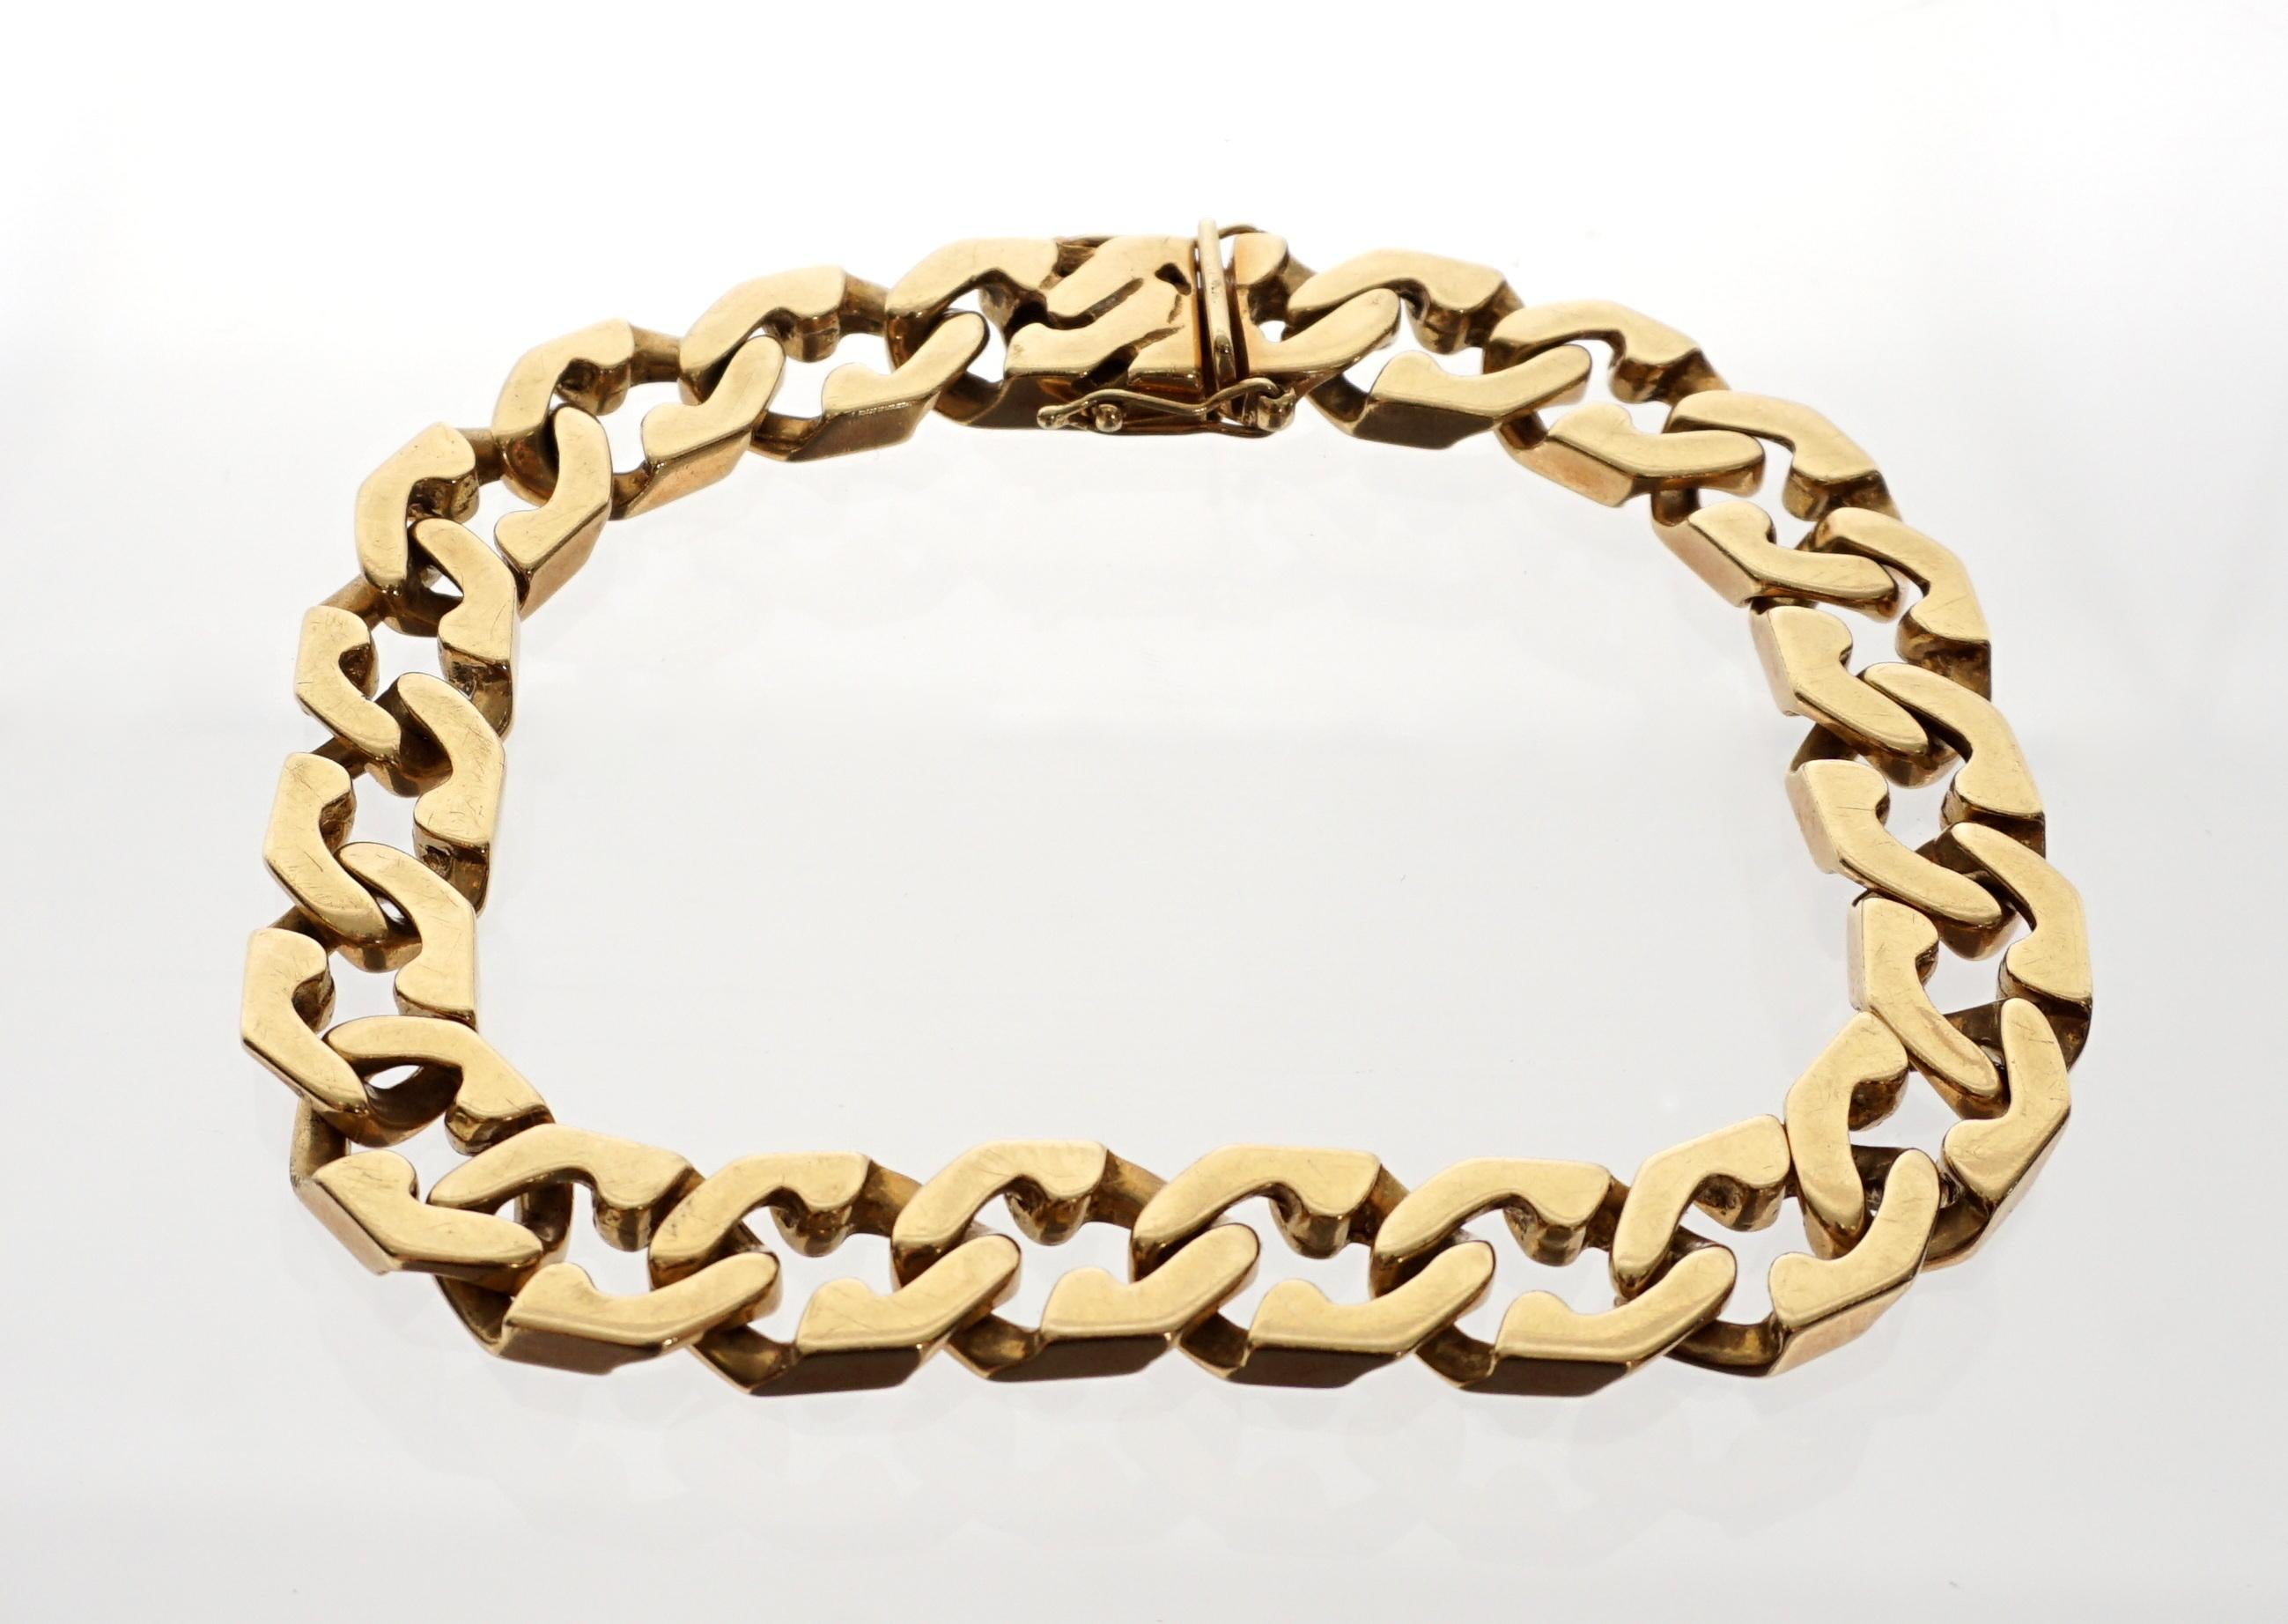 Vintage estate 14k Solid Yellow Gold Cuban Curb Link Bracelet 9”. A very elegant look.  66 Grams approx. 12mm Wide. Retail value $8,000.00
It is very very nice. EXCELLENT CONDITION. Very heavy at 66 grams and wide at approx 12 mm with a good length